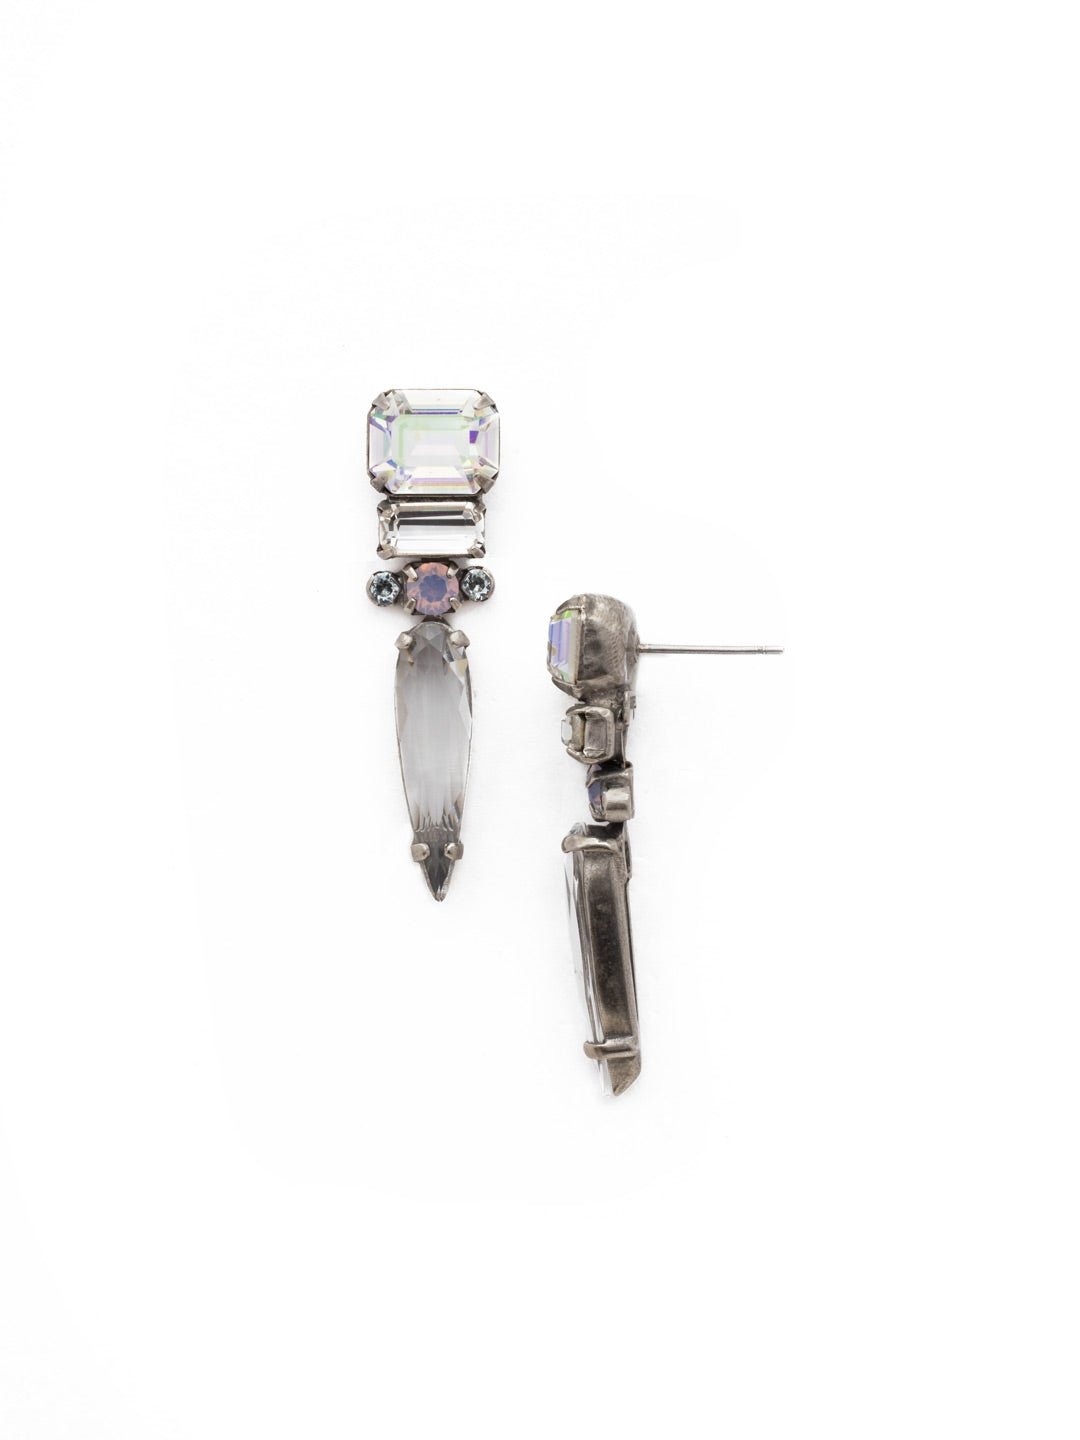 Spiked Drop Earring - EDK68ASRQ - These delicate french wire earrings featured a spike lying beneath two baguette crystals atop three rounded crystals. Add a subtle touch of sparkle and edge to your look with this pointed pair.